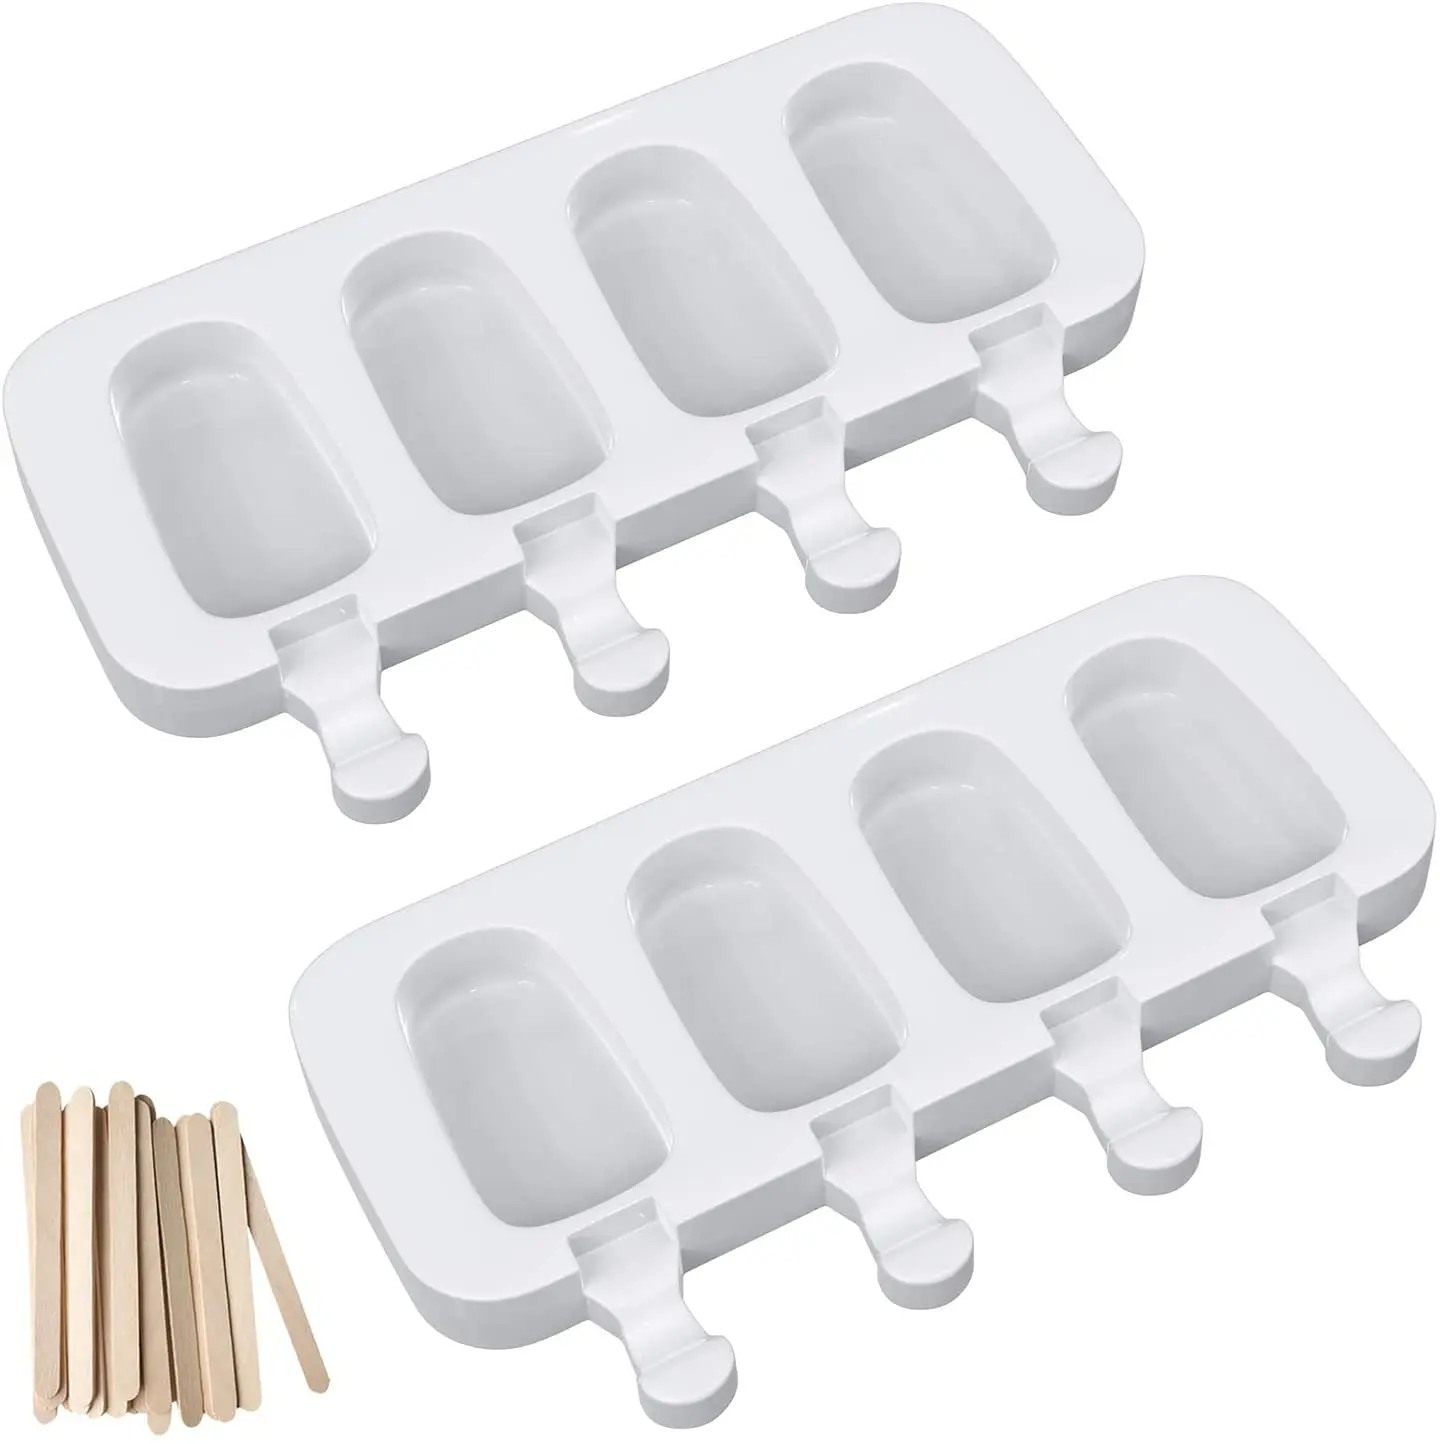 

Ice Cream Mould Ice Cube Tray Popsicle Barrel Diy Mold Silicone Ice Cream Mold with Popsicle Stick